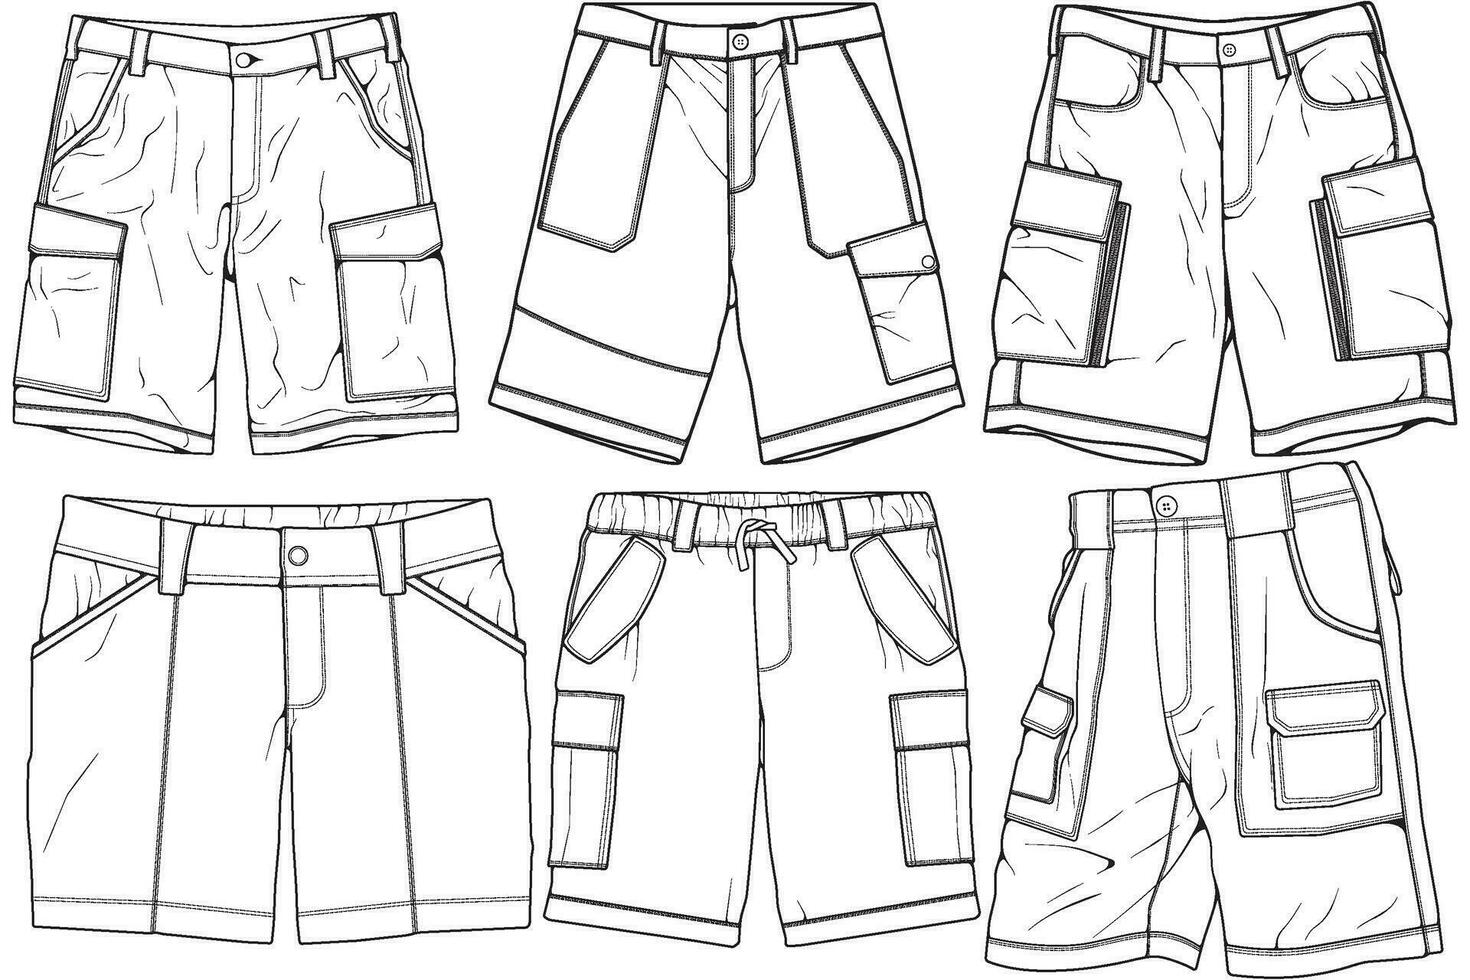 Modern Short pants outline drawing vector, Modern short pants in a sketch style, training template outline, vector Illustration.